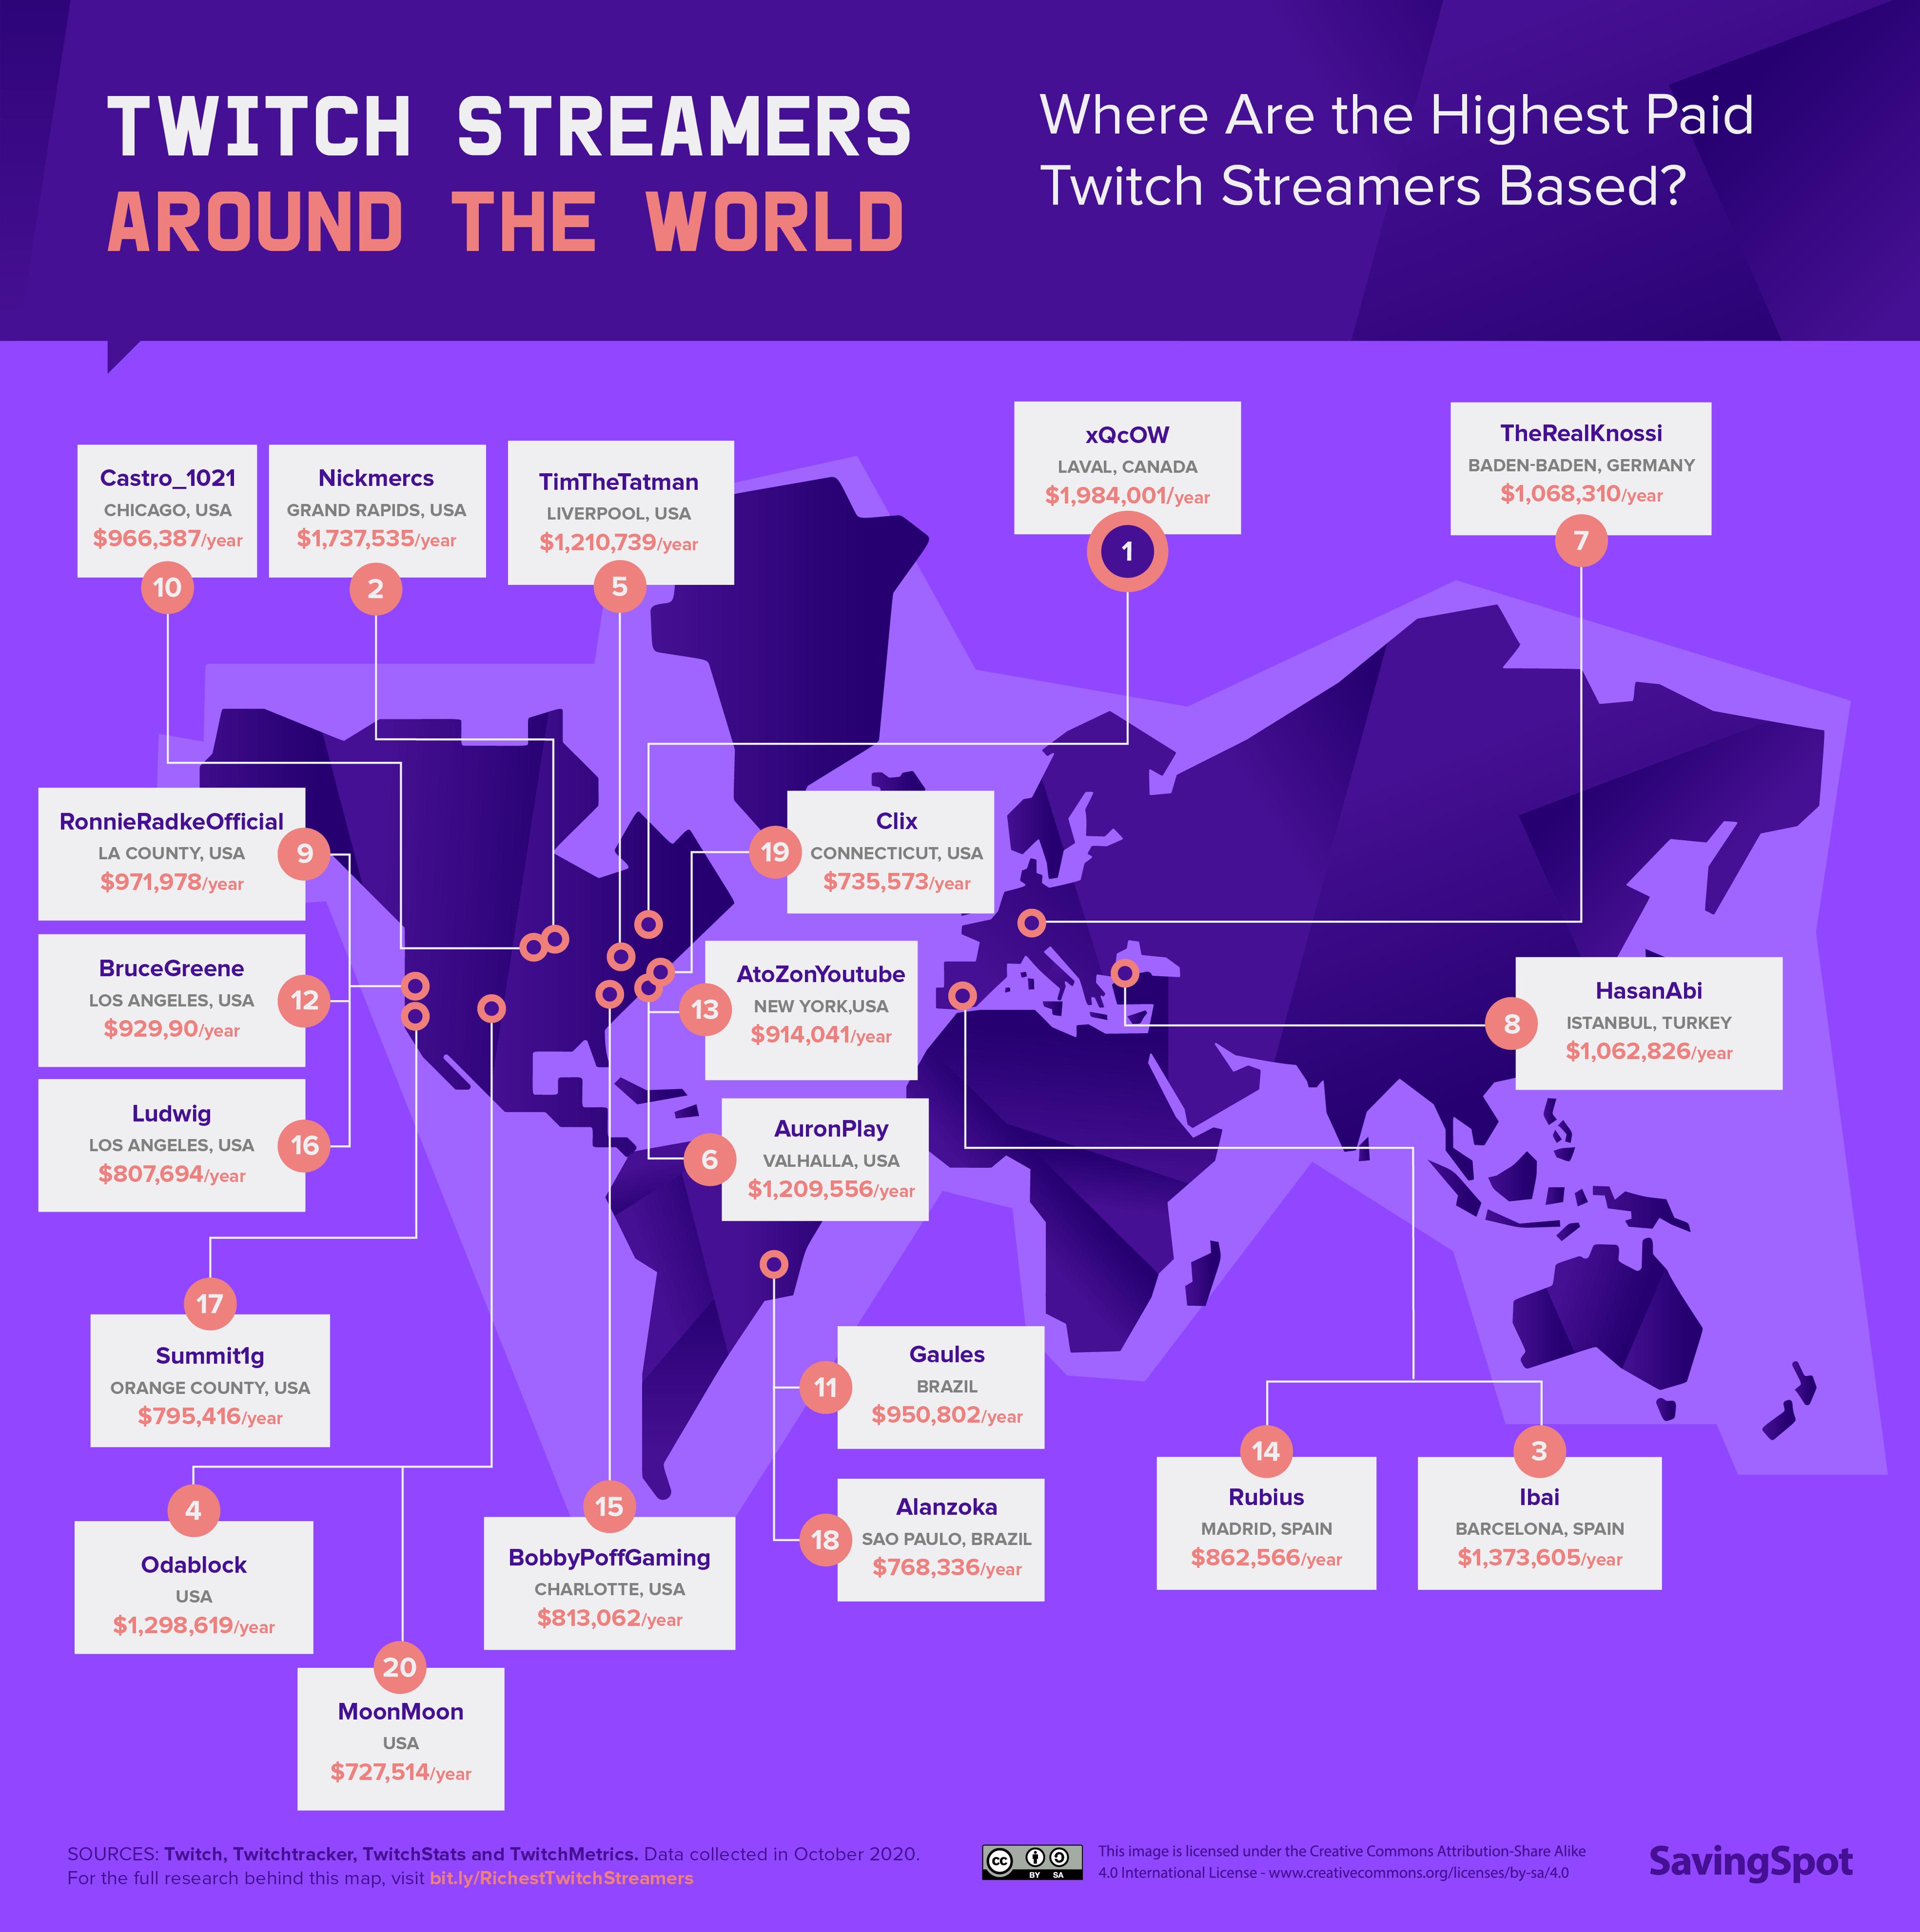 SavingSpot geographical map showing Twitch's top earners by location.